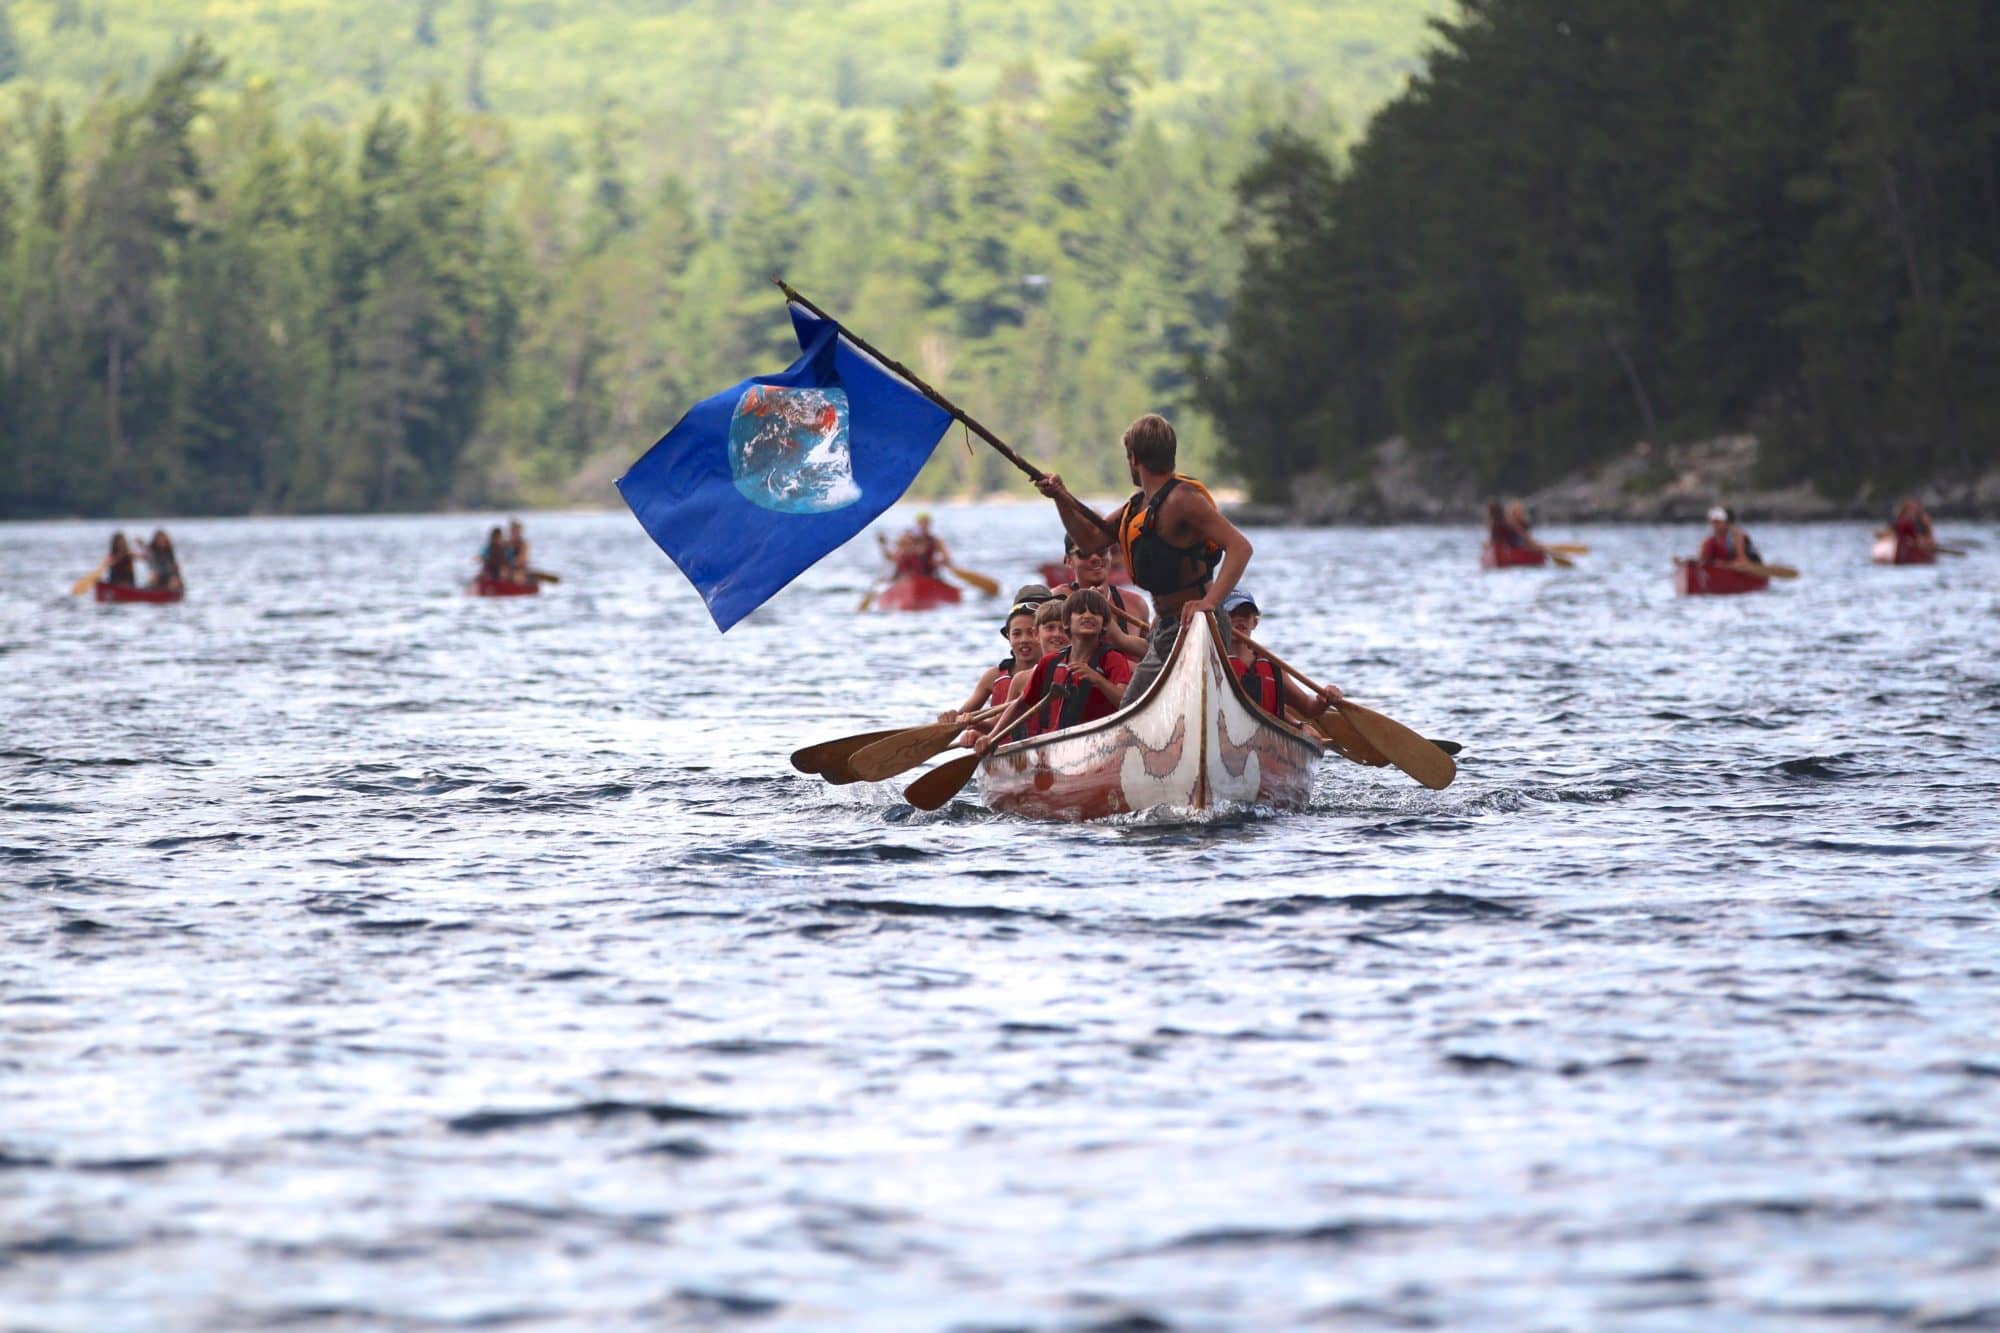 Trip leader at front of canoe waving earth flag